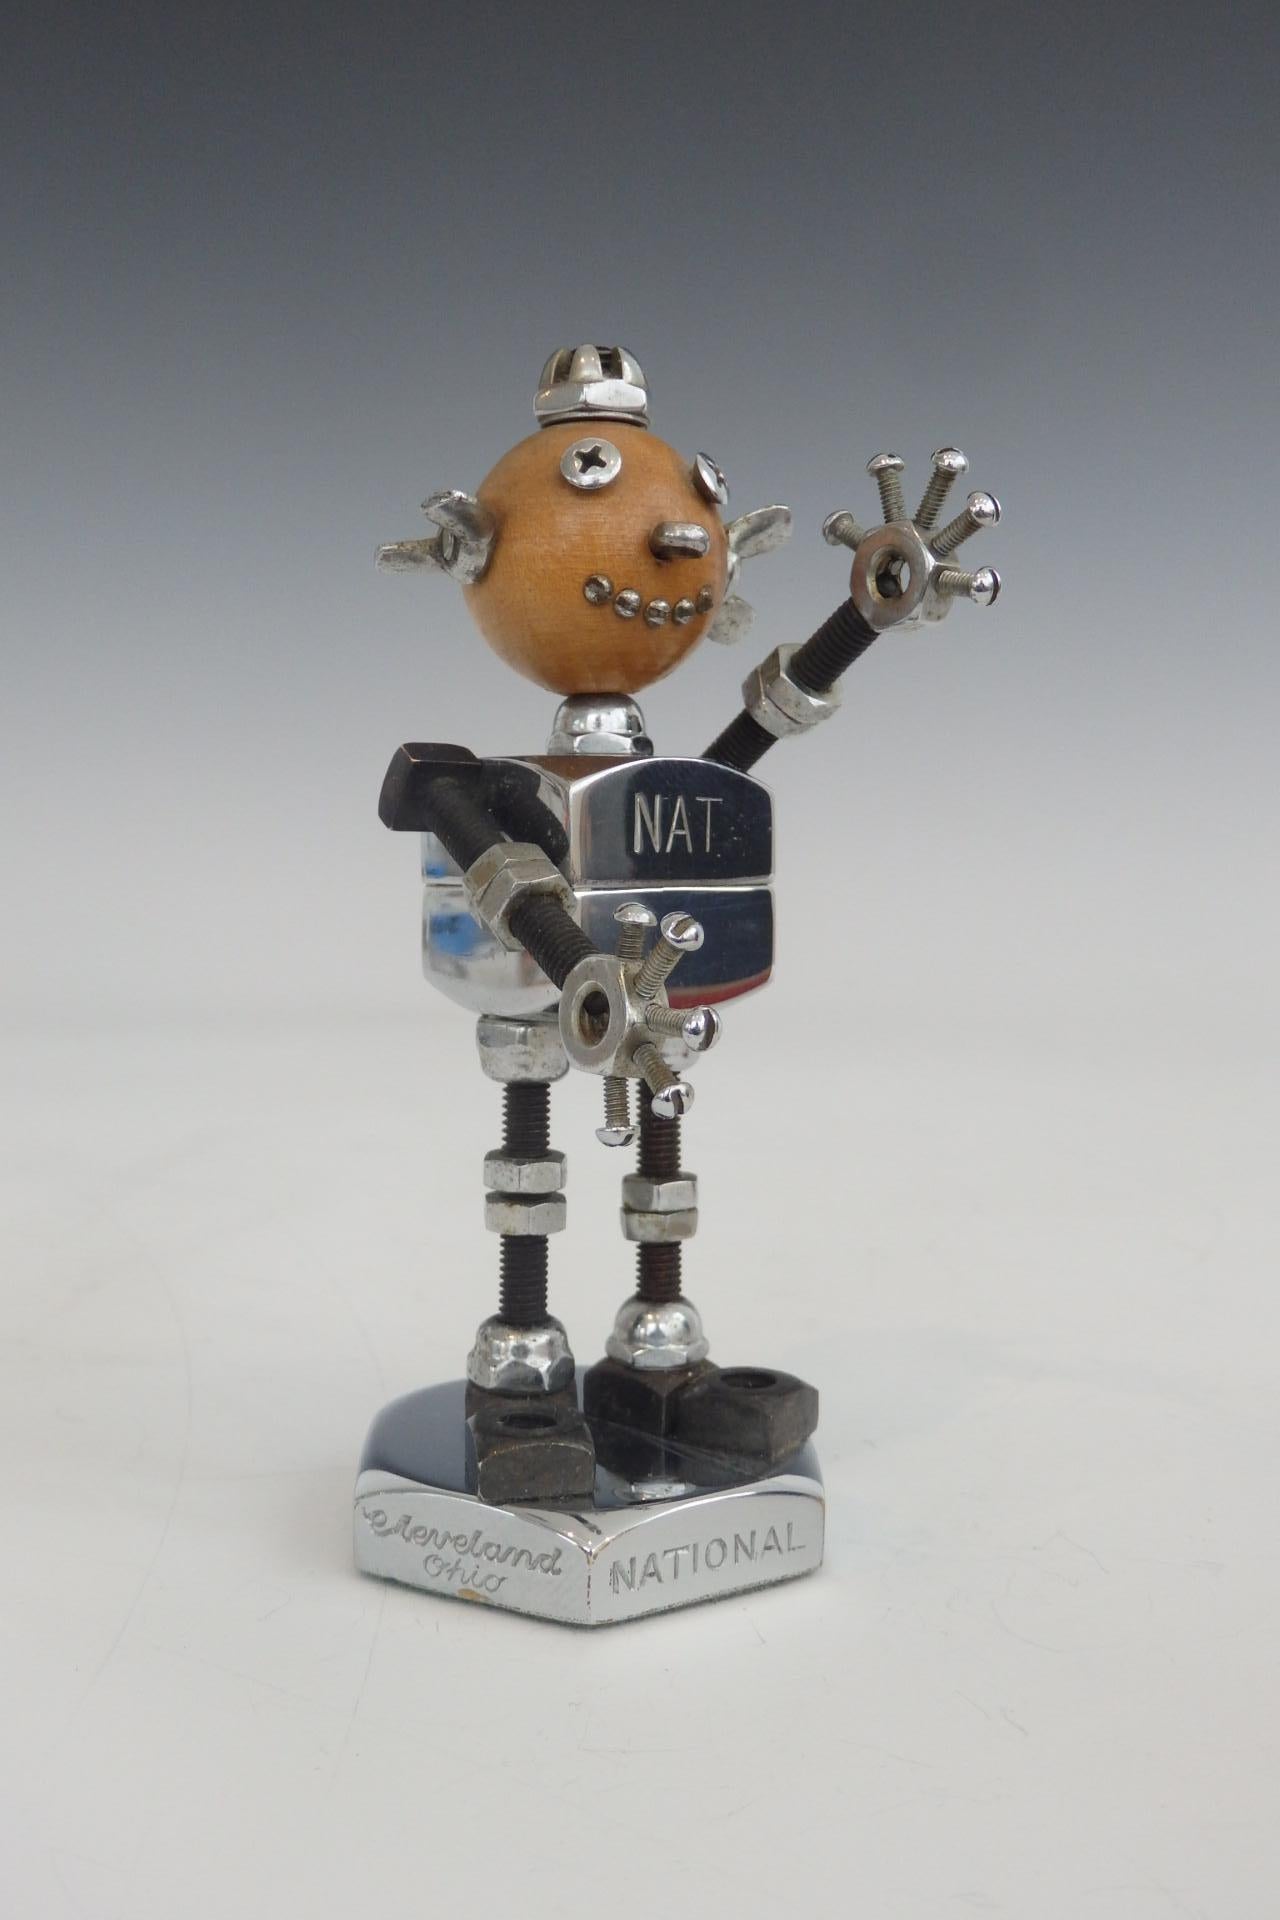 National harder advertising mascot. Made up of chromed nuts and hardware bits. Shown with old hardware box depicting its image. Robot is in excellent condition. Box shows wear.